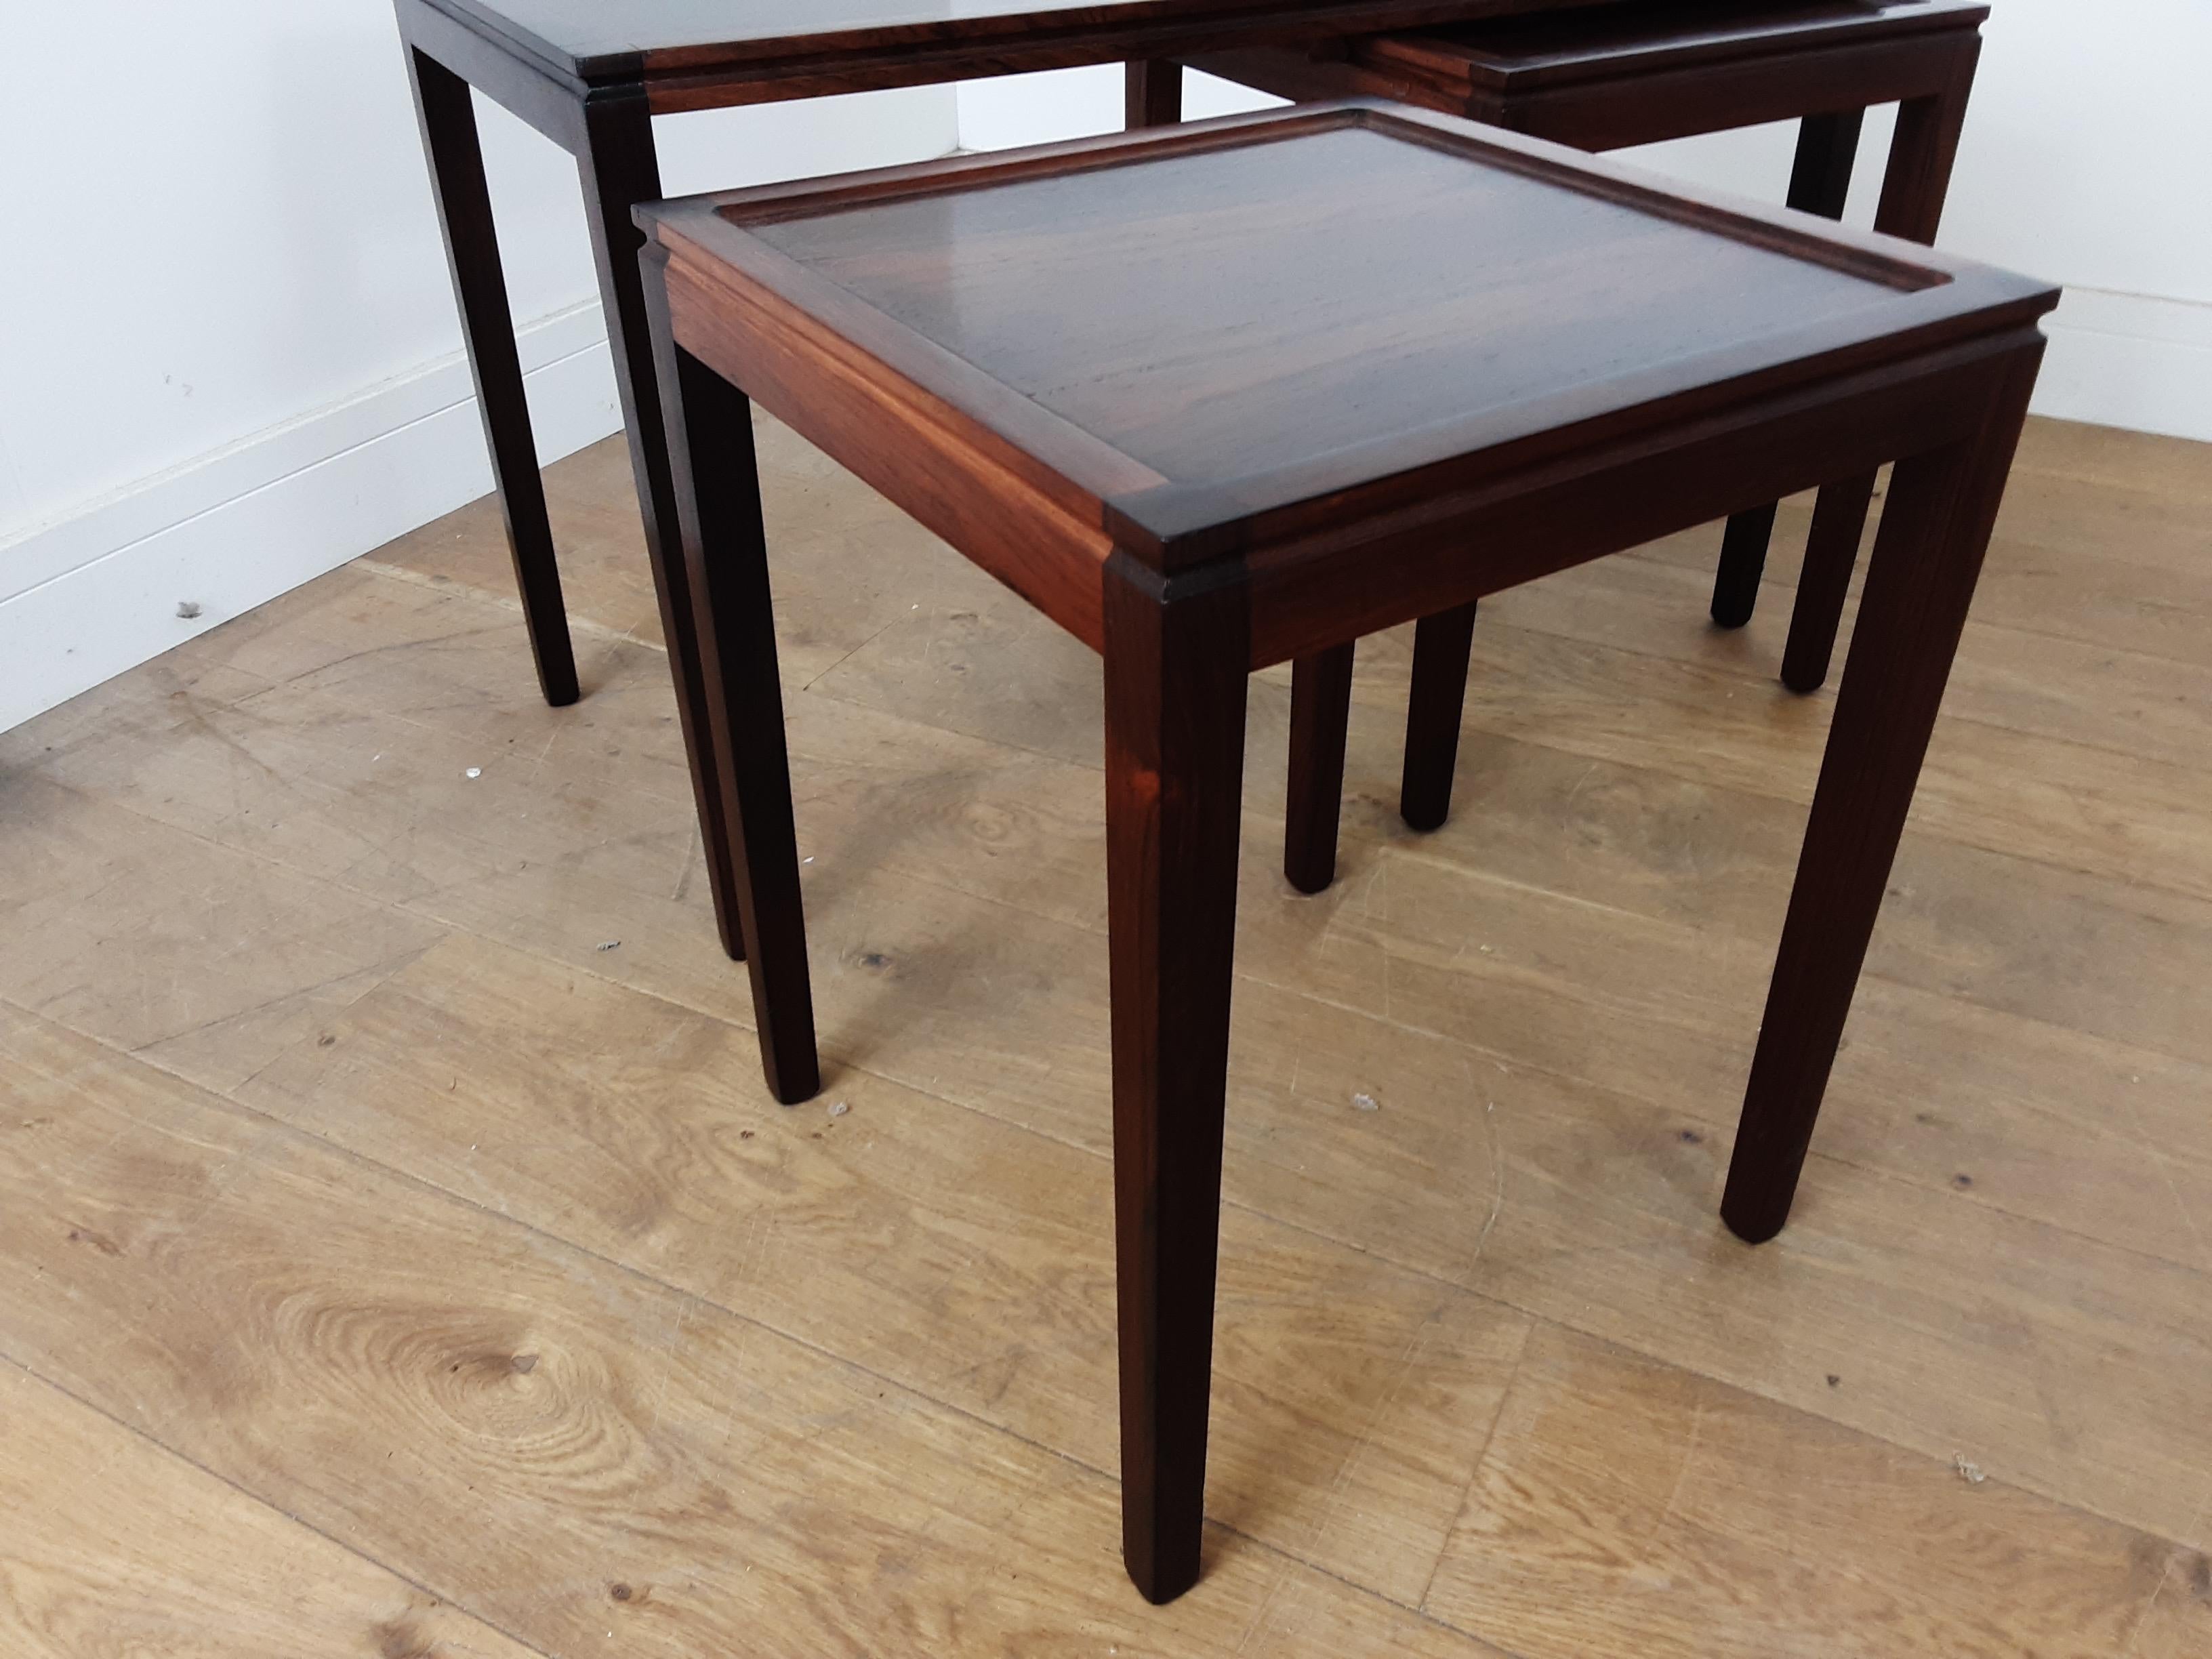 Midcentury Nest of Tables in Deep Brown Figured Rosewood circa 1960 from Denmark For Sale 3